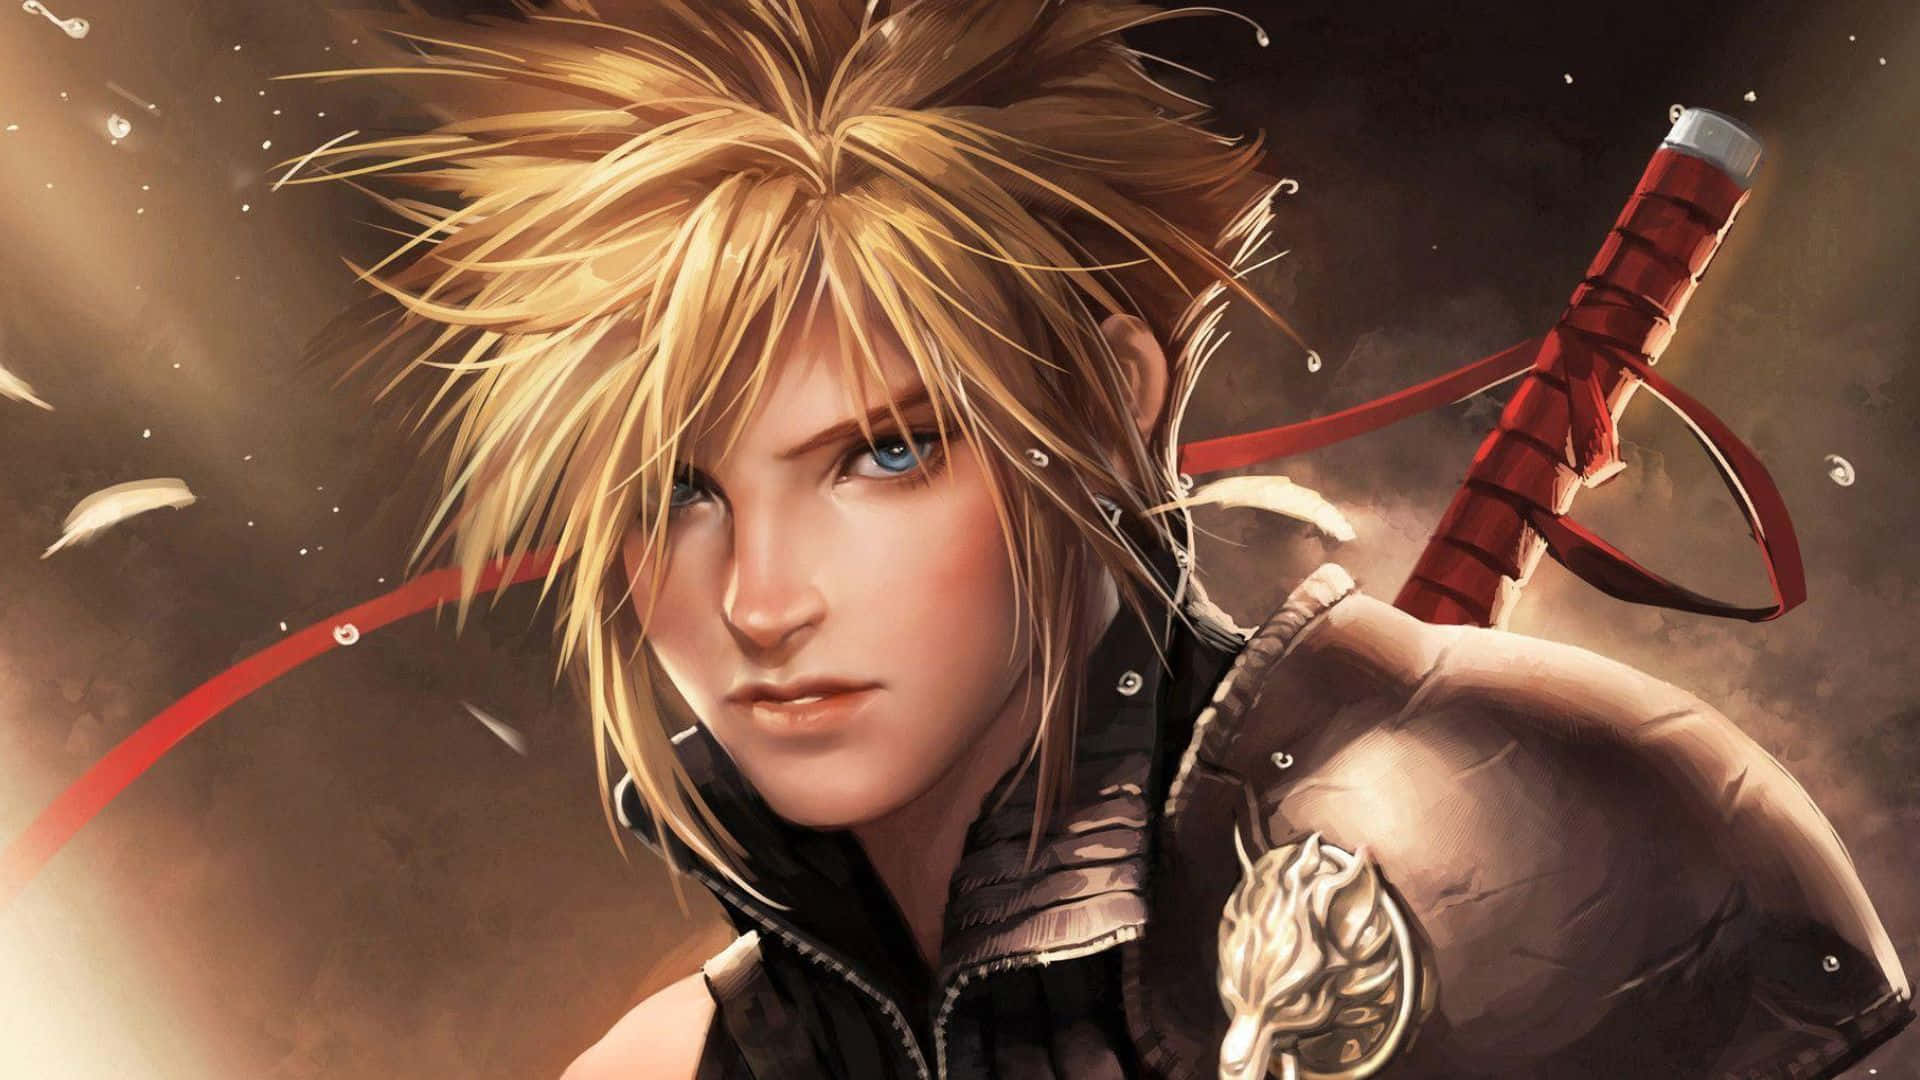 "cloud Strife With His Iconic Buster Sword From Final Fantasy Vii" Wallpaper